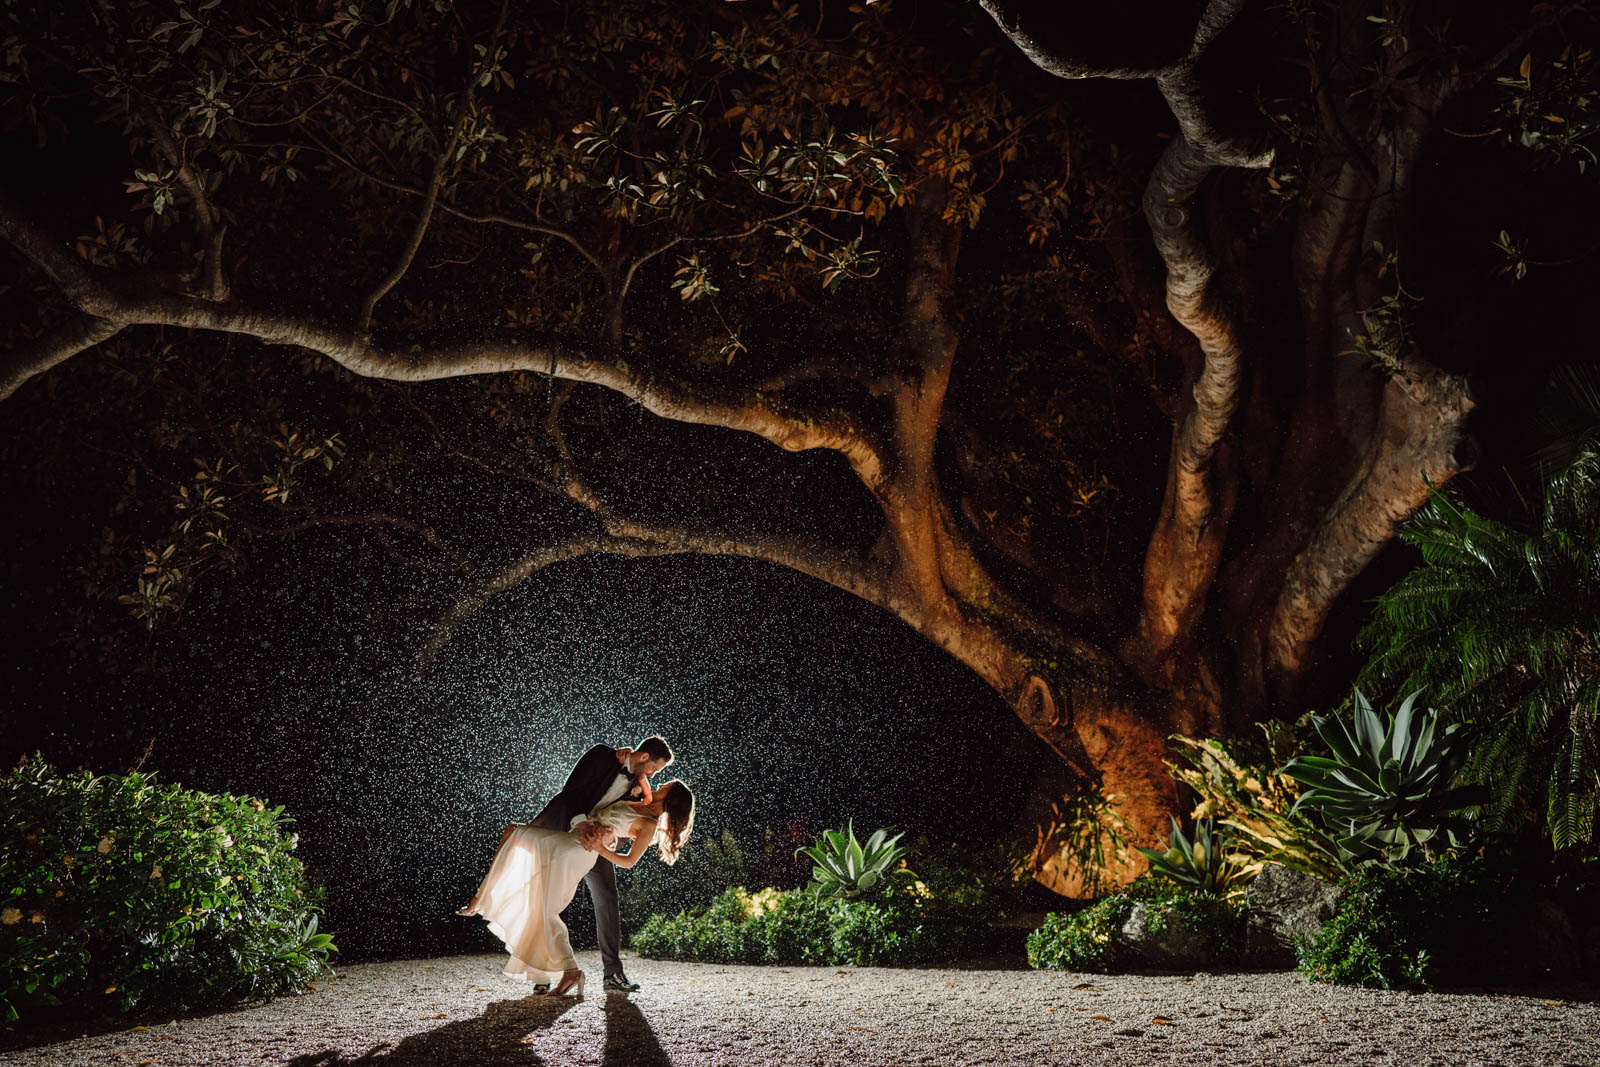 Bride and groom kissing under a fig tree at night in the rain